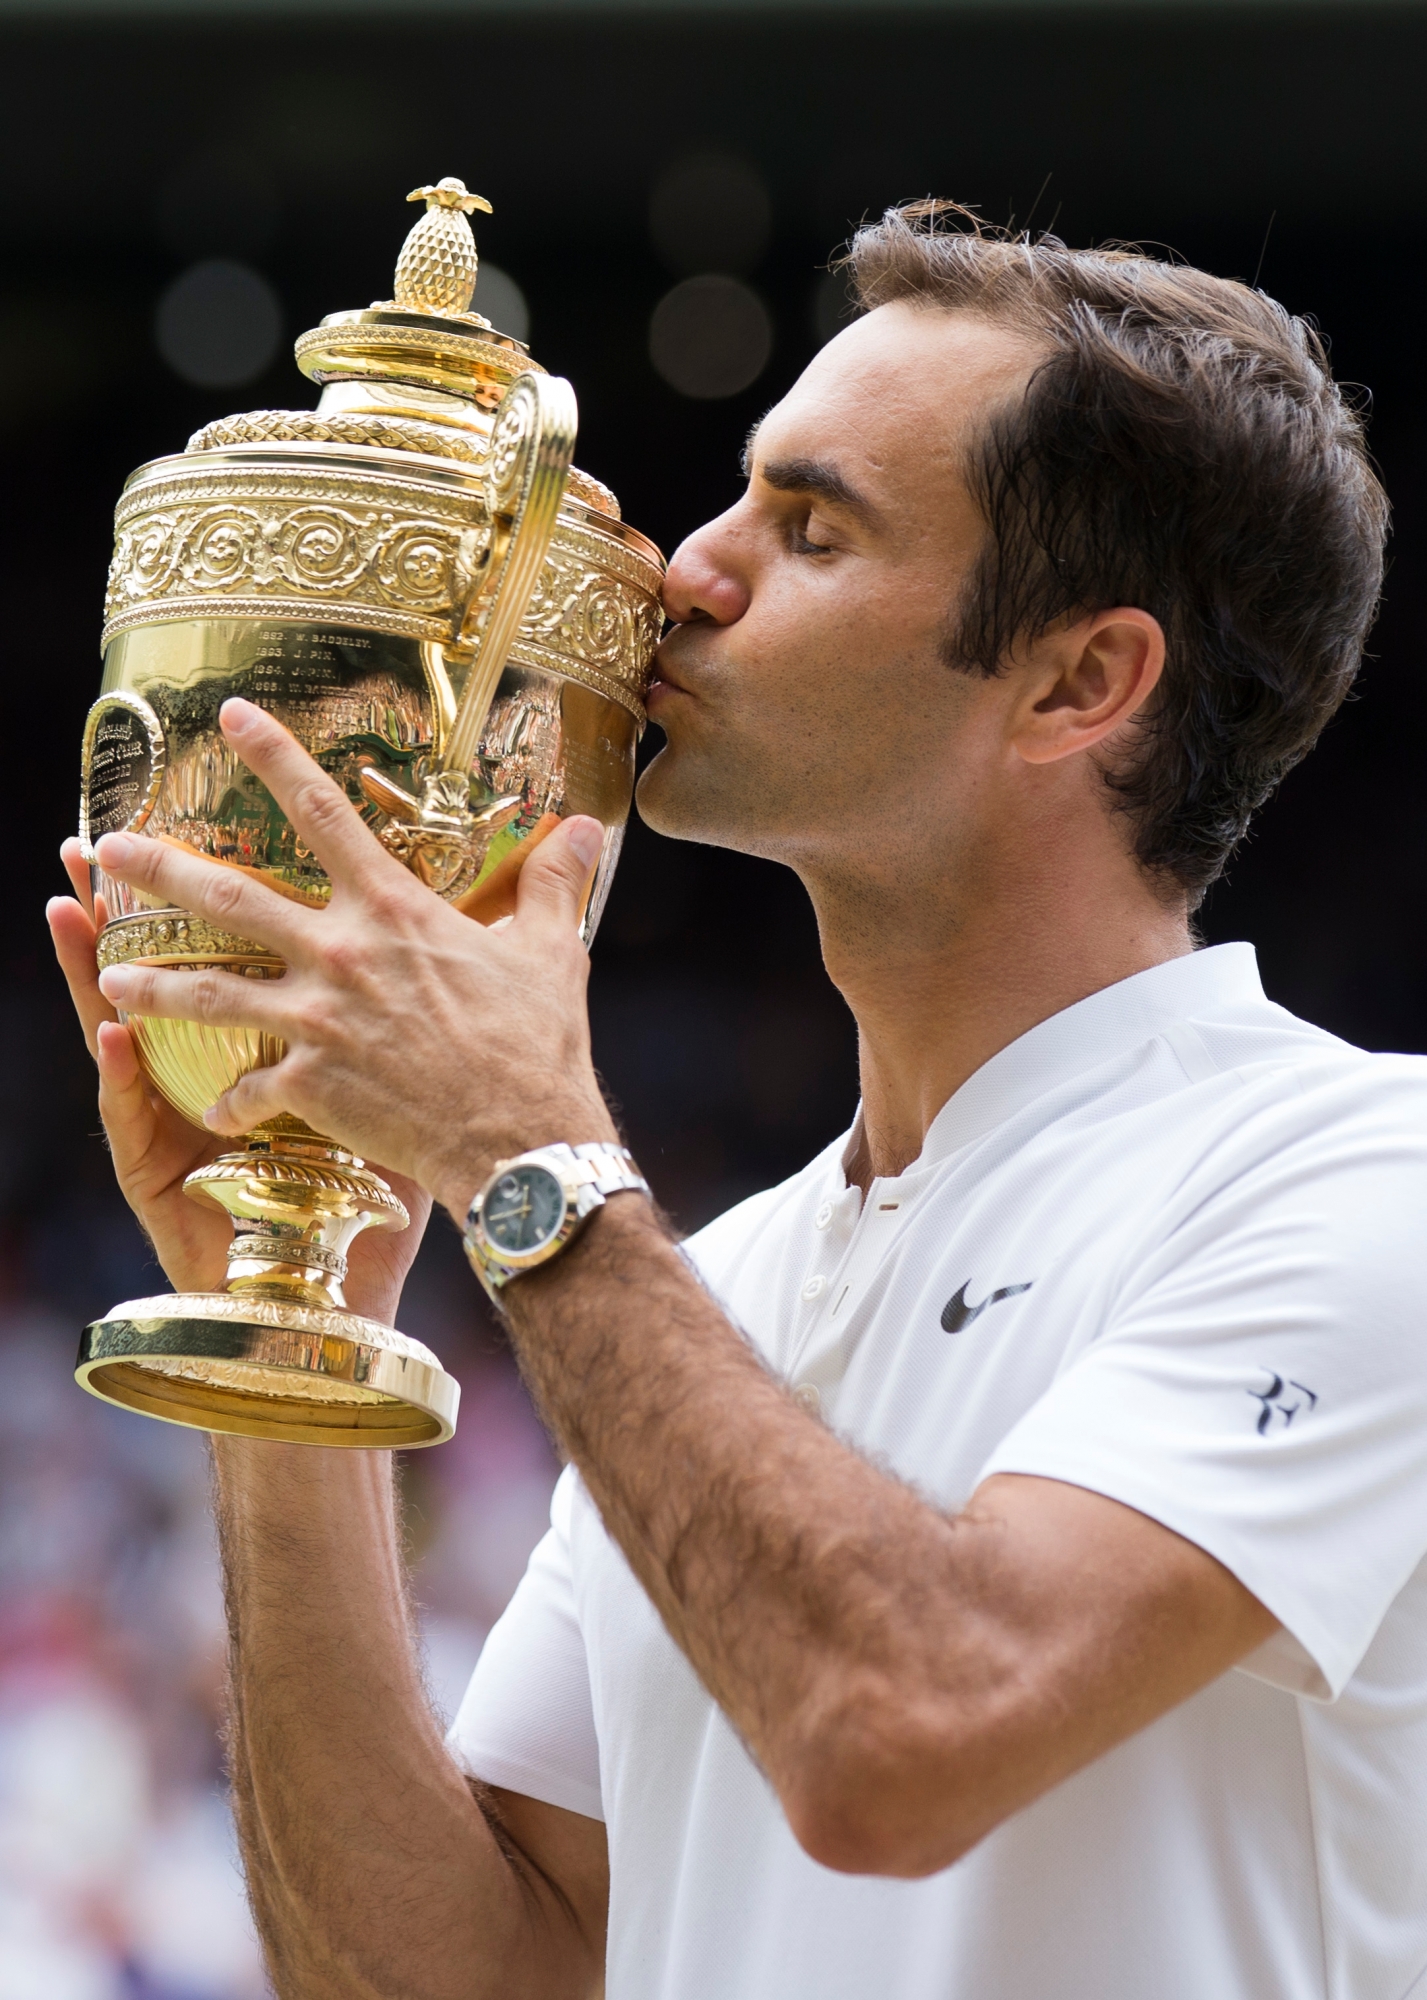 Roger Federer of Switzerland kisses the trophy after winning the men's final match against Marin Cilic of Croatia during the Wimbledon Championships at the All England Lawn Tennis Club, in London, Britain, 16 July 2017. (KEYSTONE/Peter Klaunzer)Roger Federer TENNIS WIMBLEDON 2017